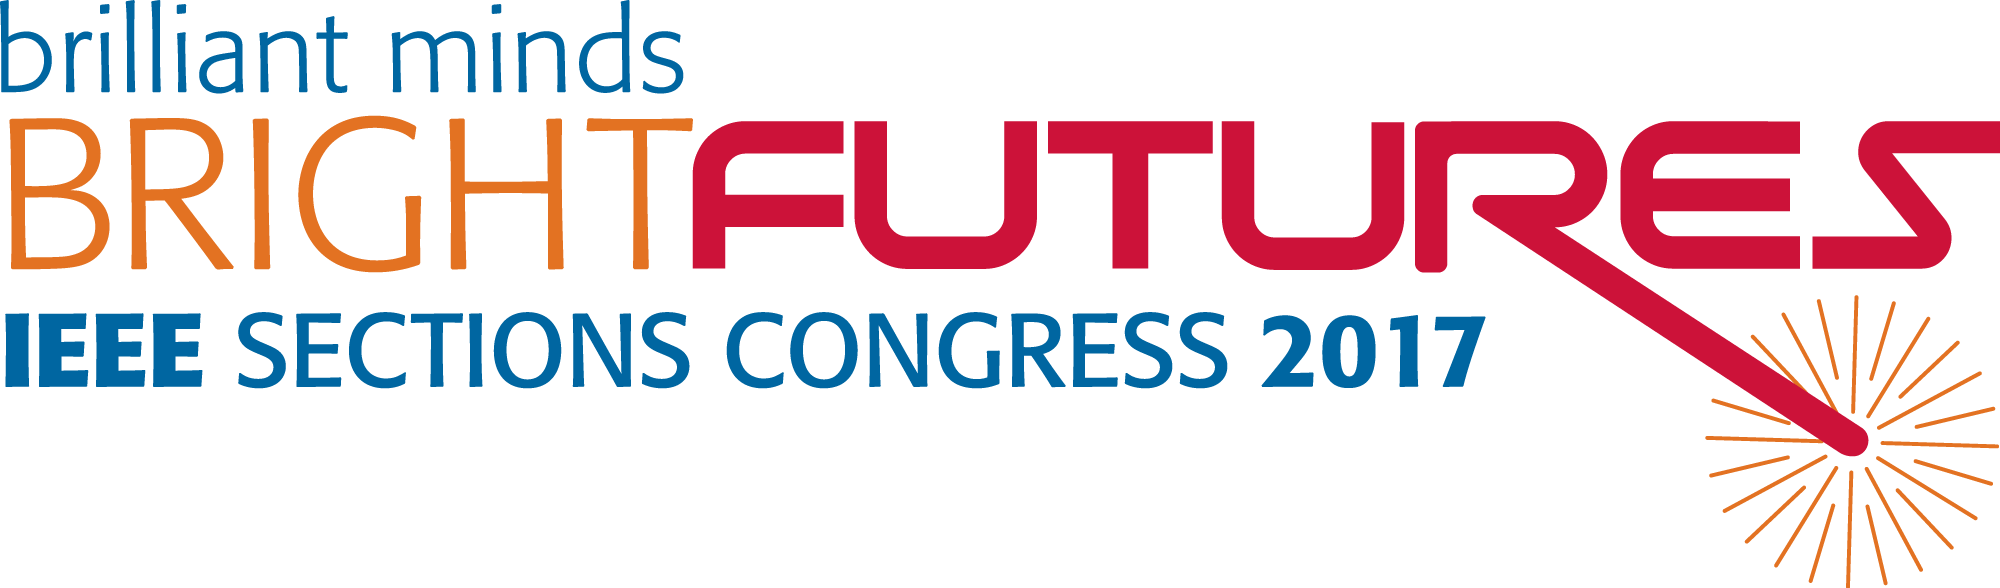 The logo for IEEE Sections Congress 2017